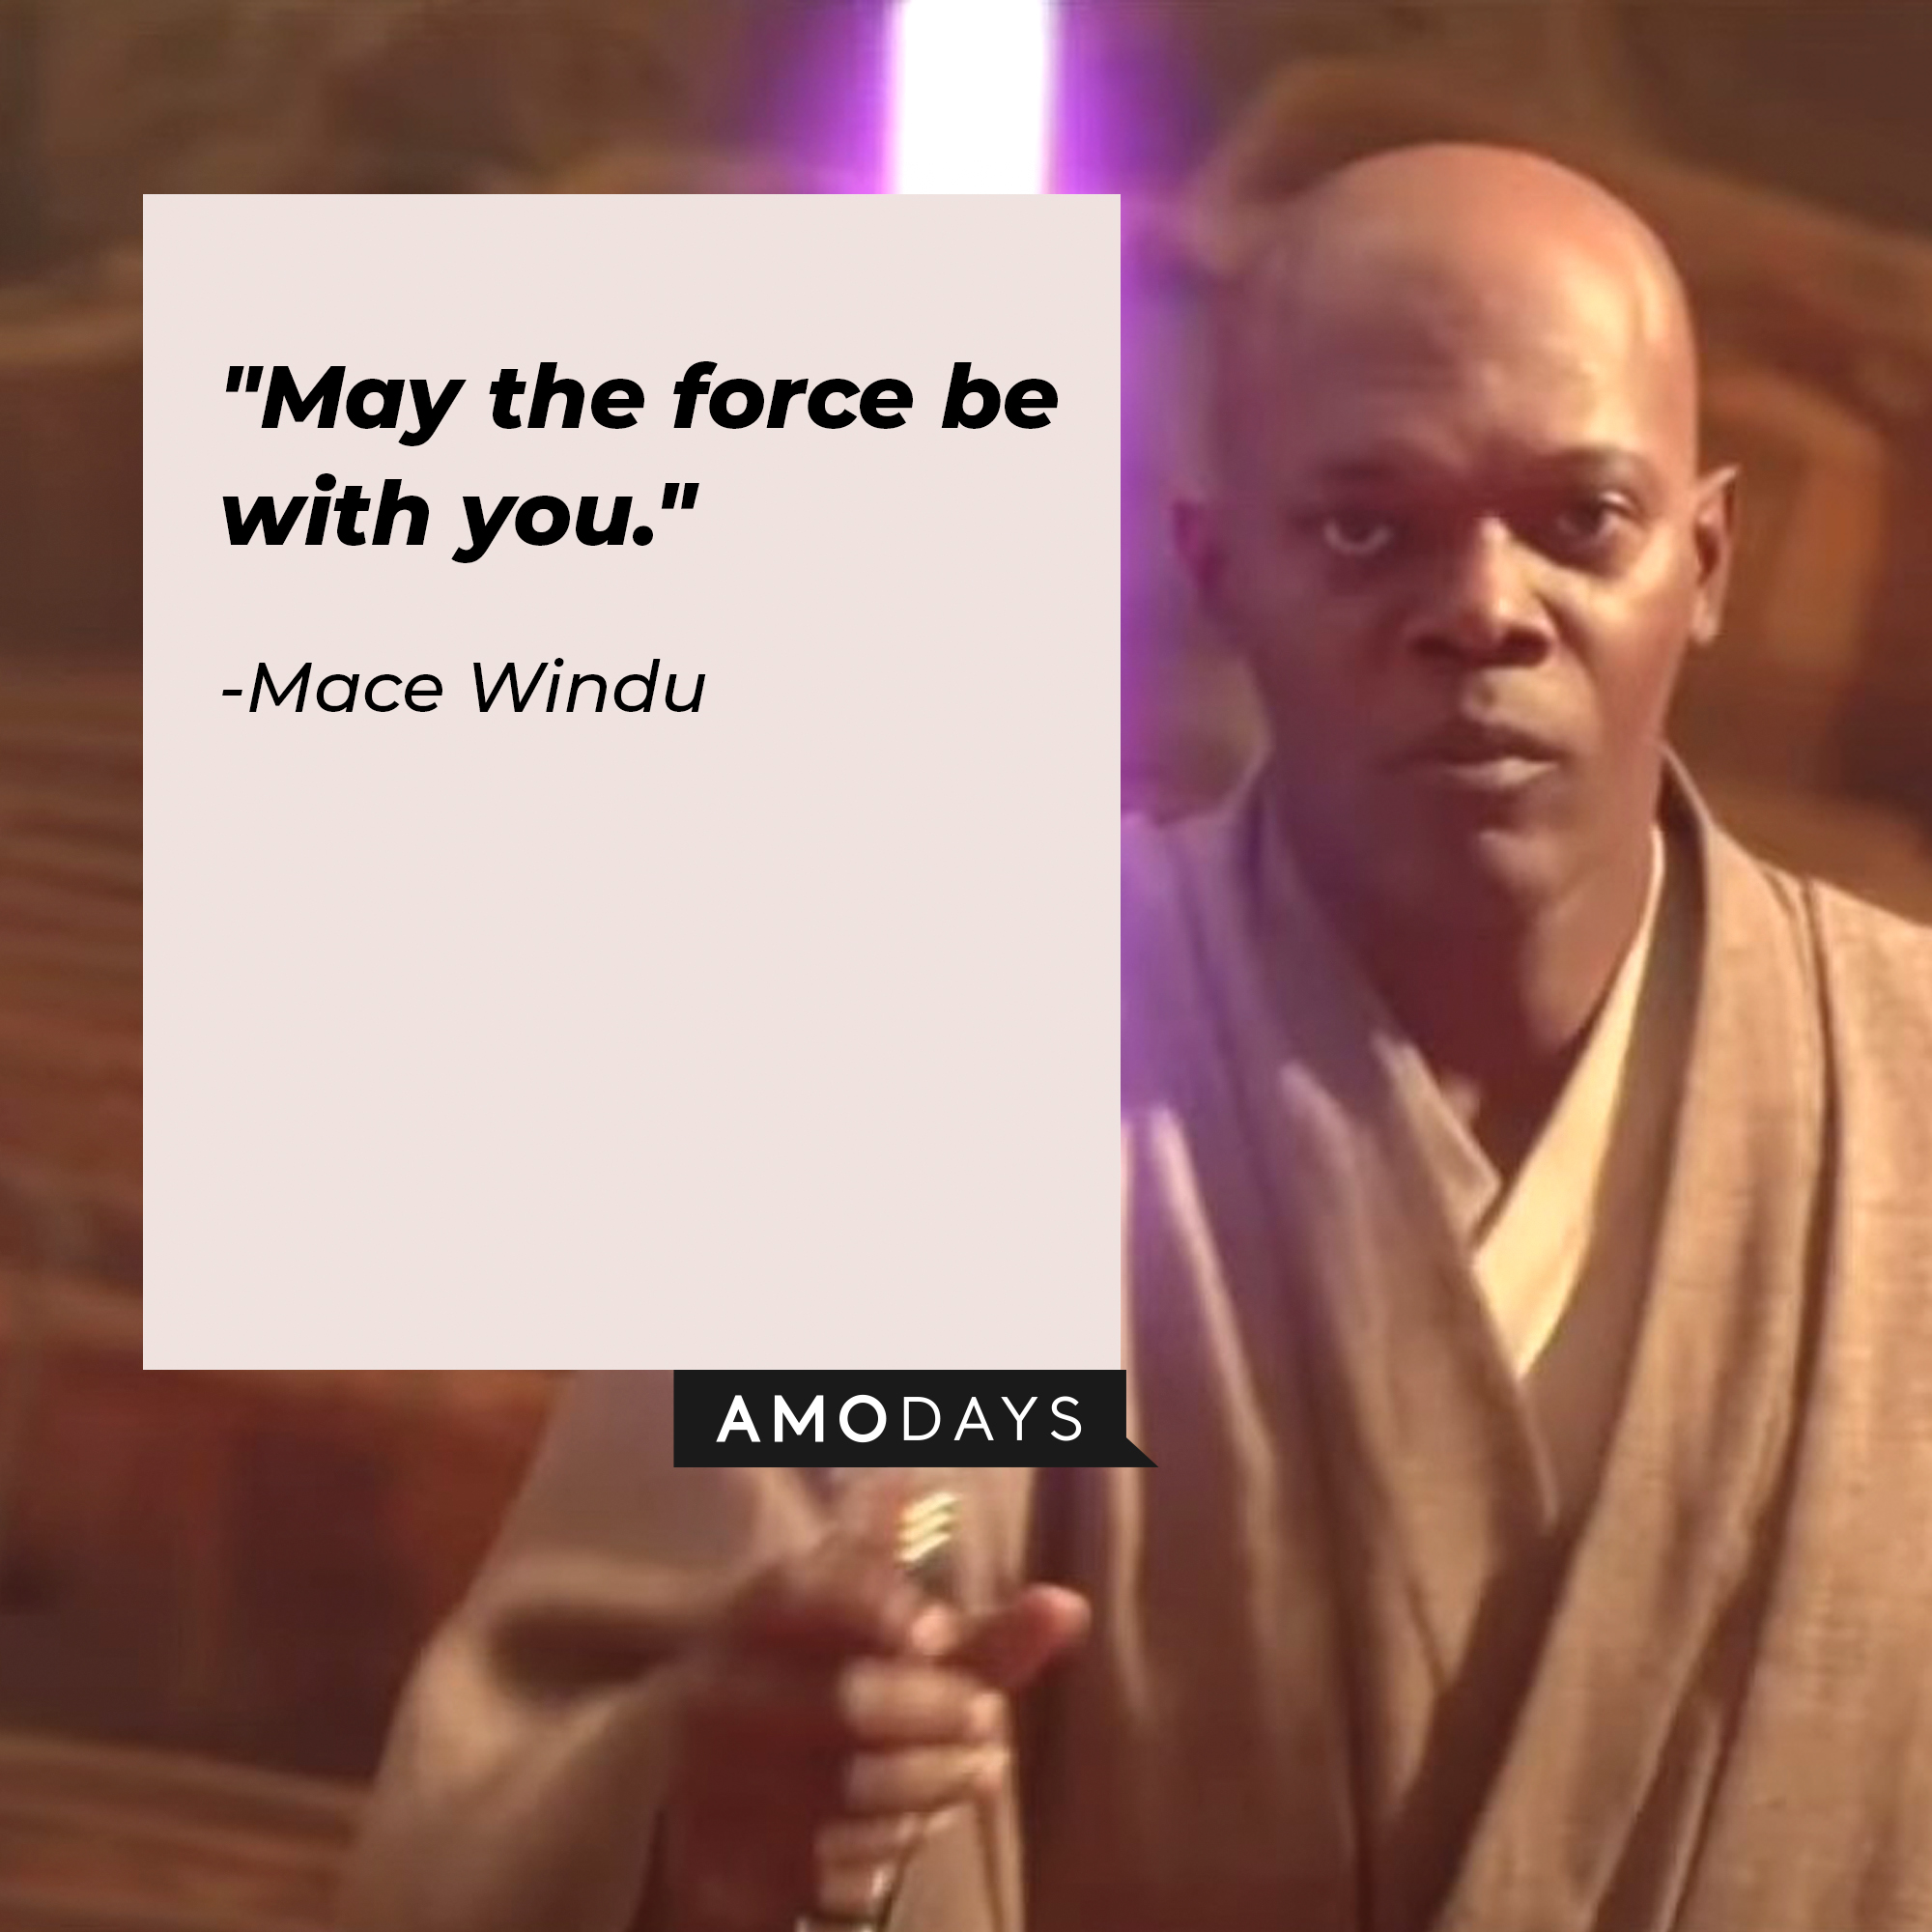 Mace Windu's quote: "May the force be with you." | Image: Facebook / StarWars.UK